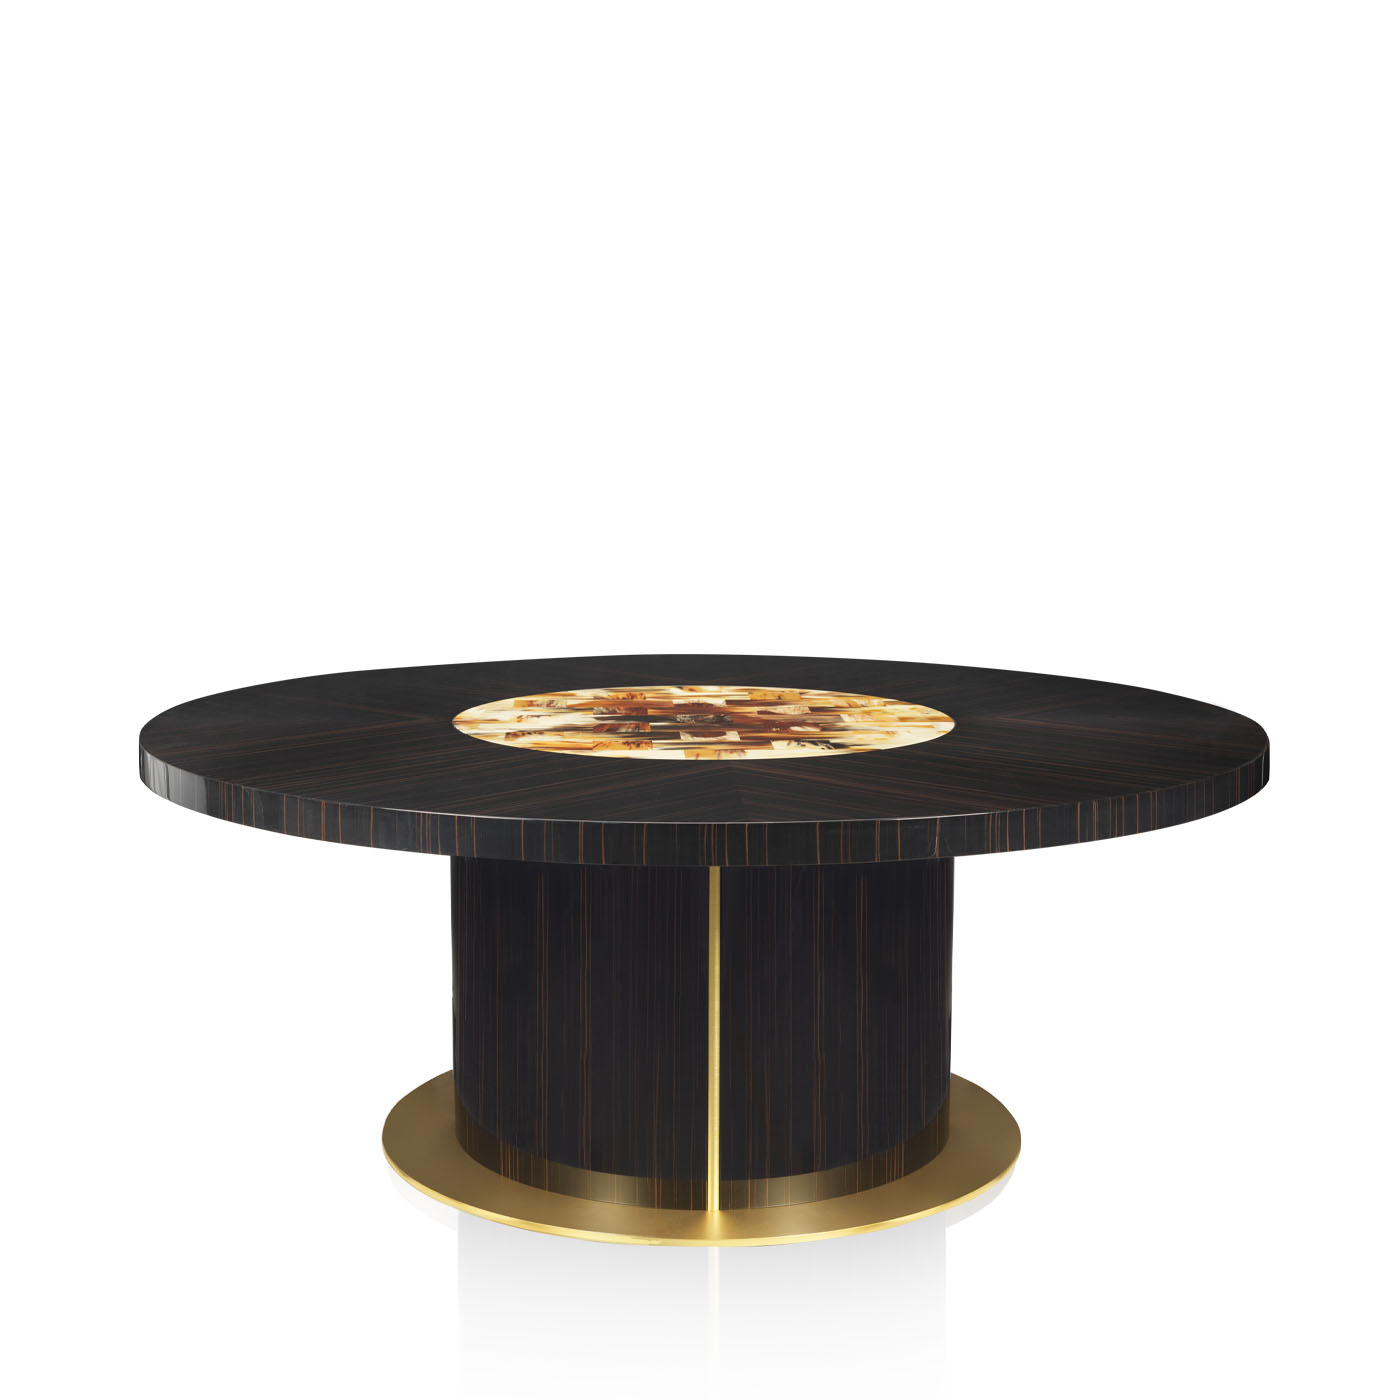 Tables and console tables - Nettuno tall table in glossy ebony and horn - Lazy Susan - Arcahorn